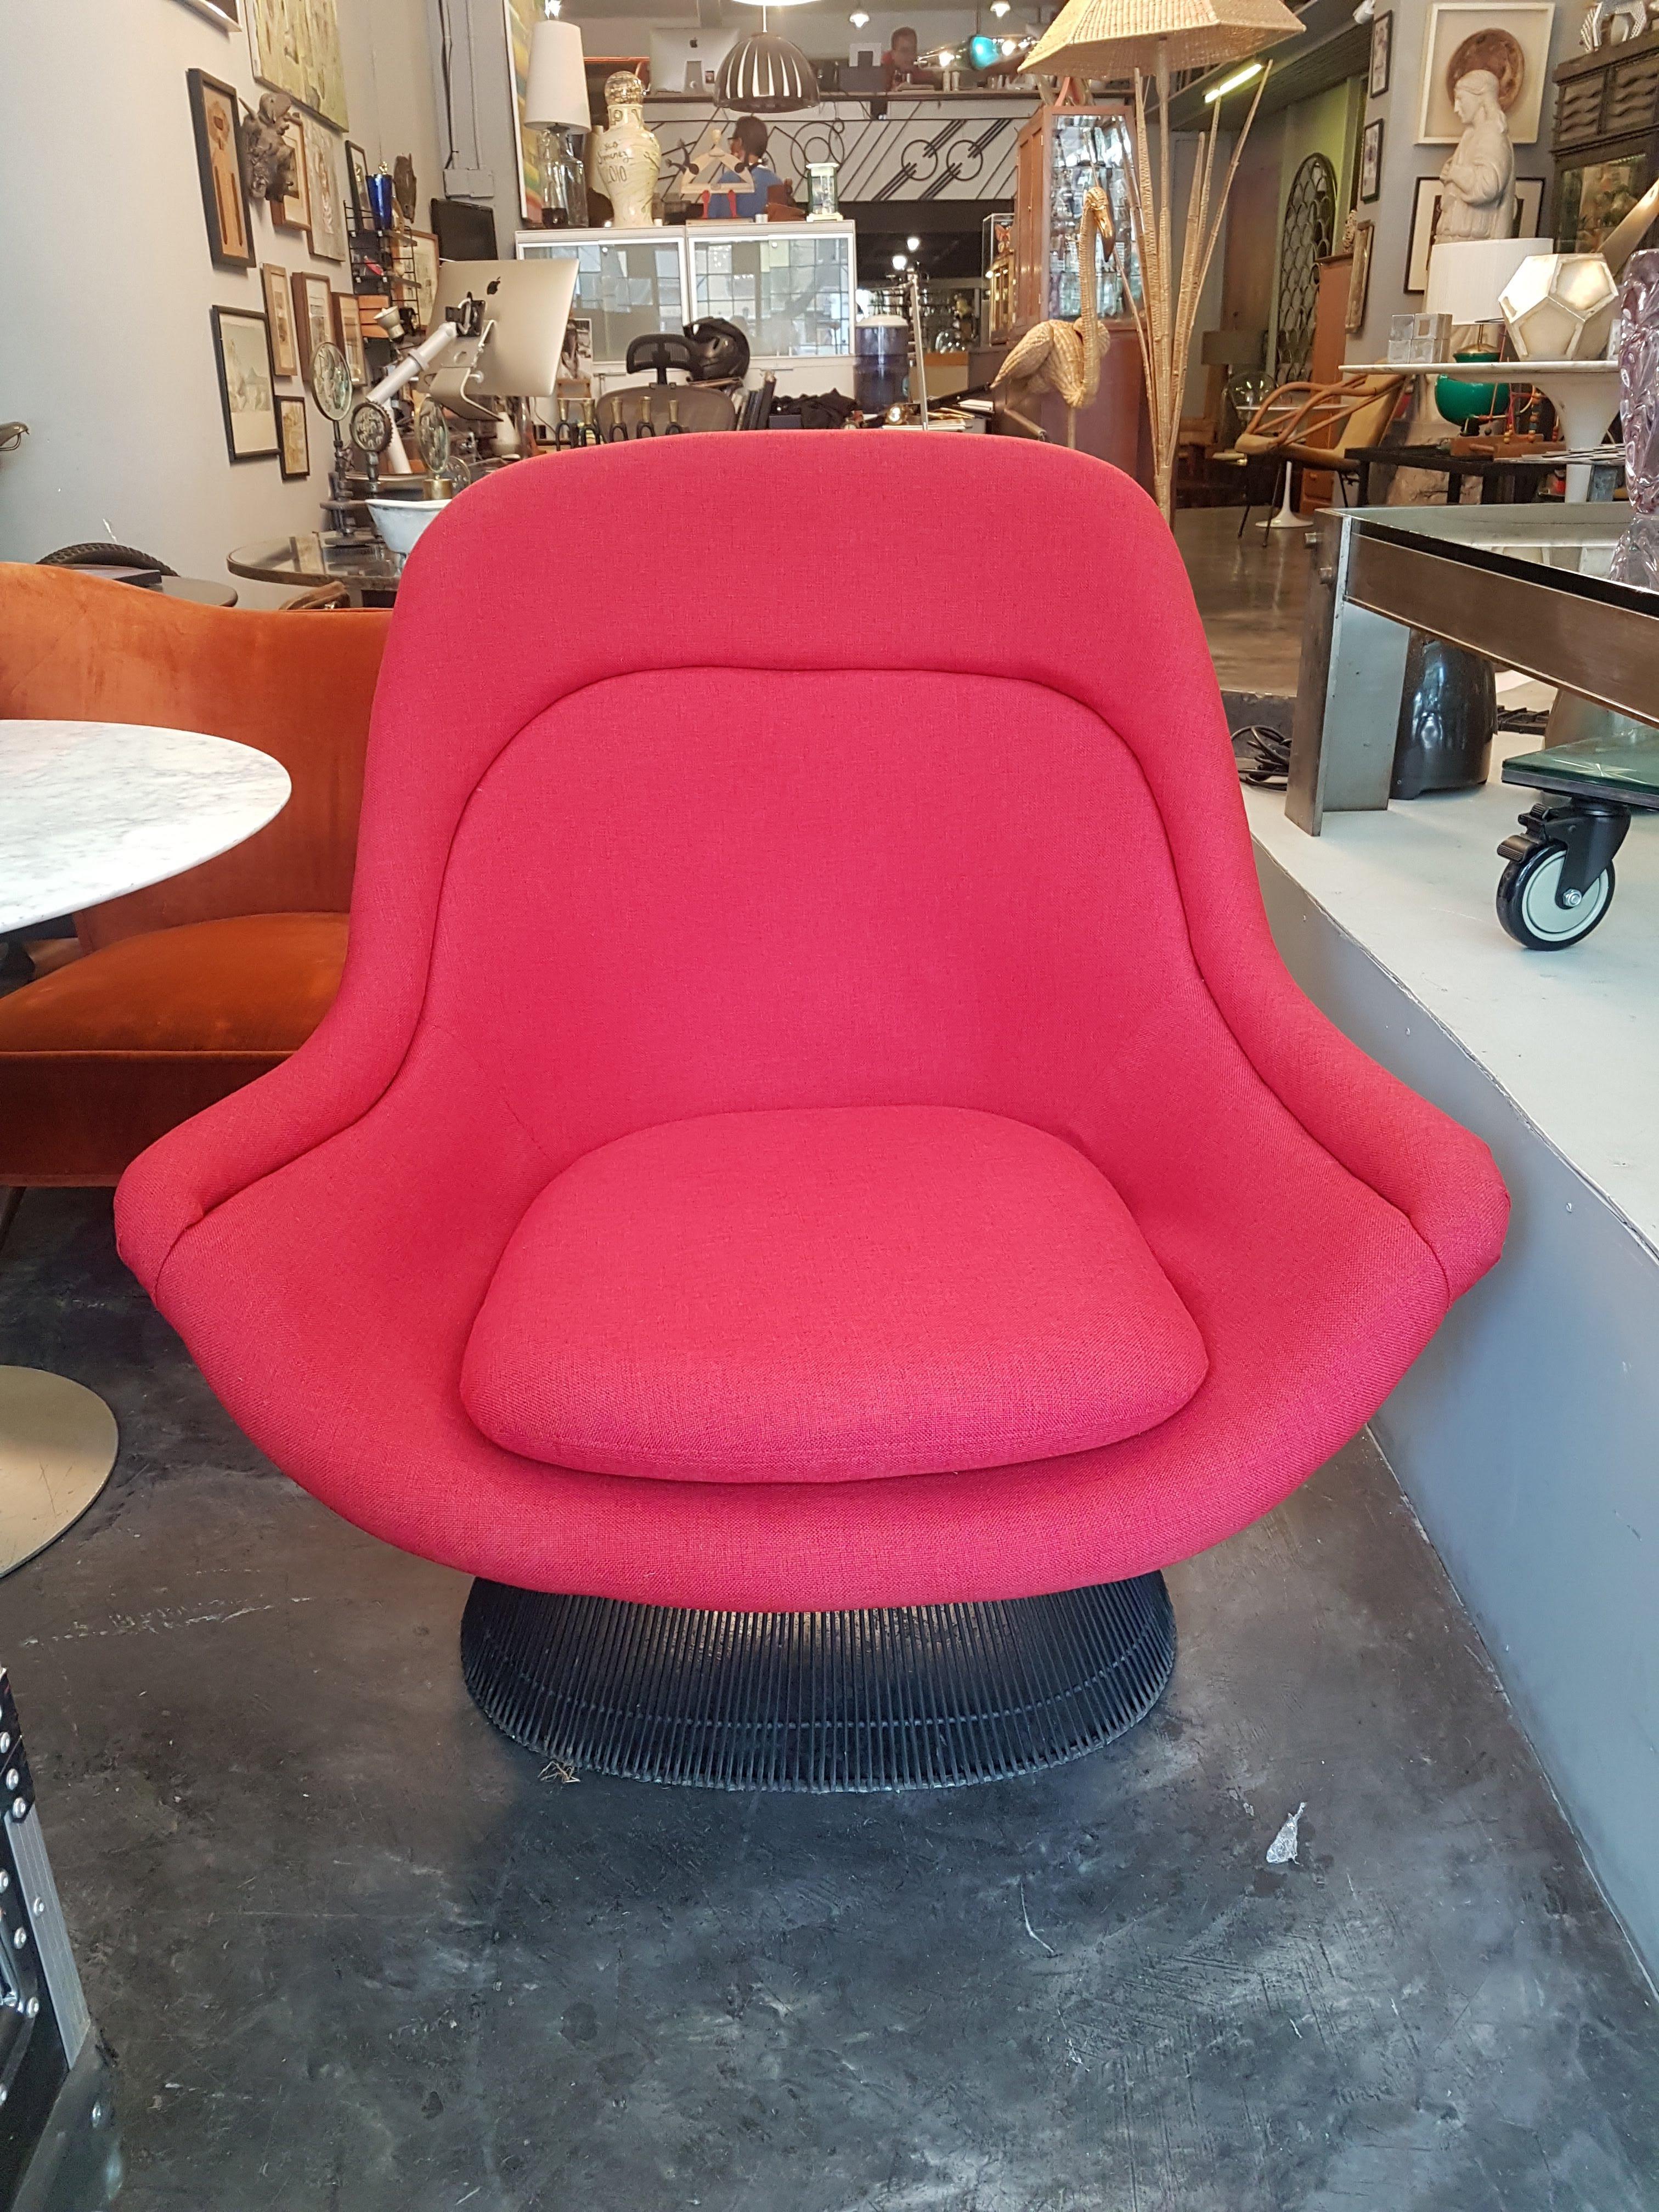 A marvelous lounge chair attributed to American designer Warren Platner. The steel rod structure has recently been reupholstered with red fabric.